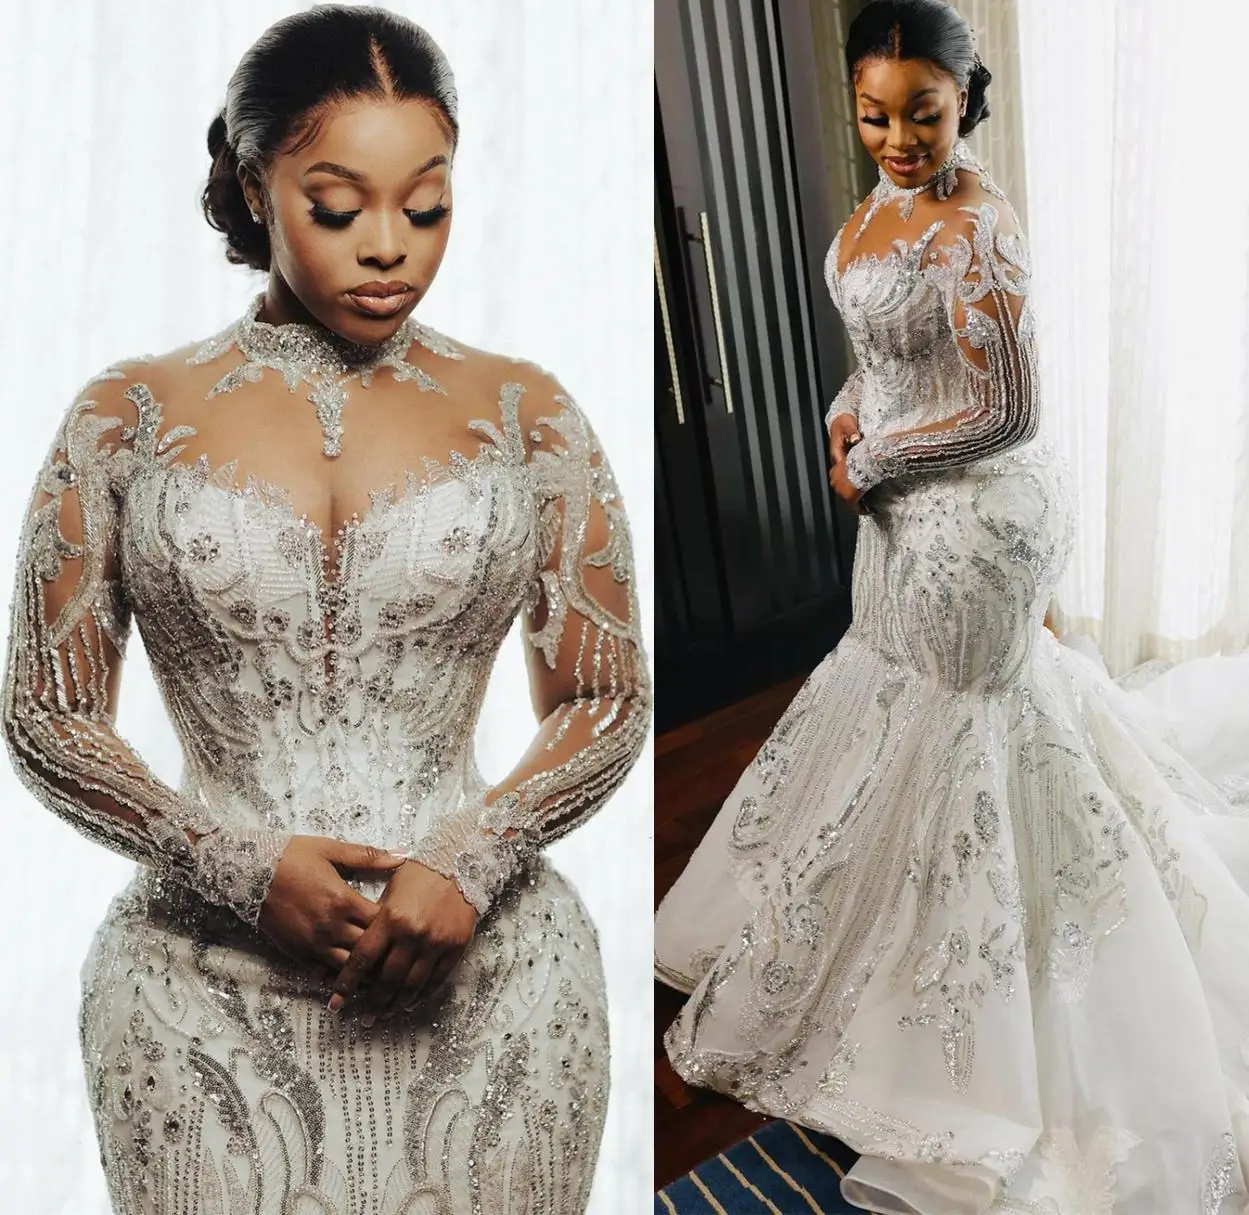 

Mermaid Luxurious Sparkly Wedding Dress Plus Size Arabic Aso Ebi Sheer Neck Lace applique illusion long sleeve Bridal Gowns 2023